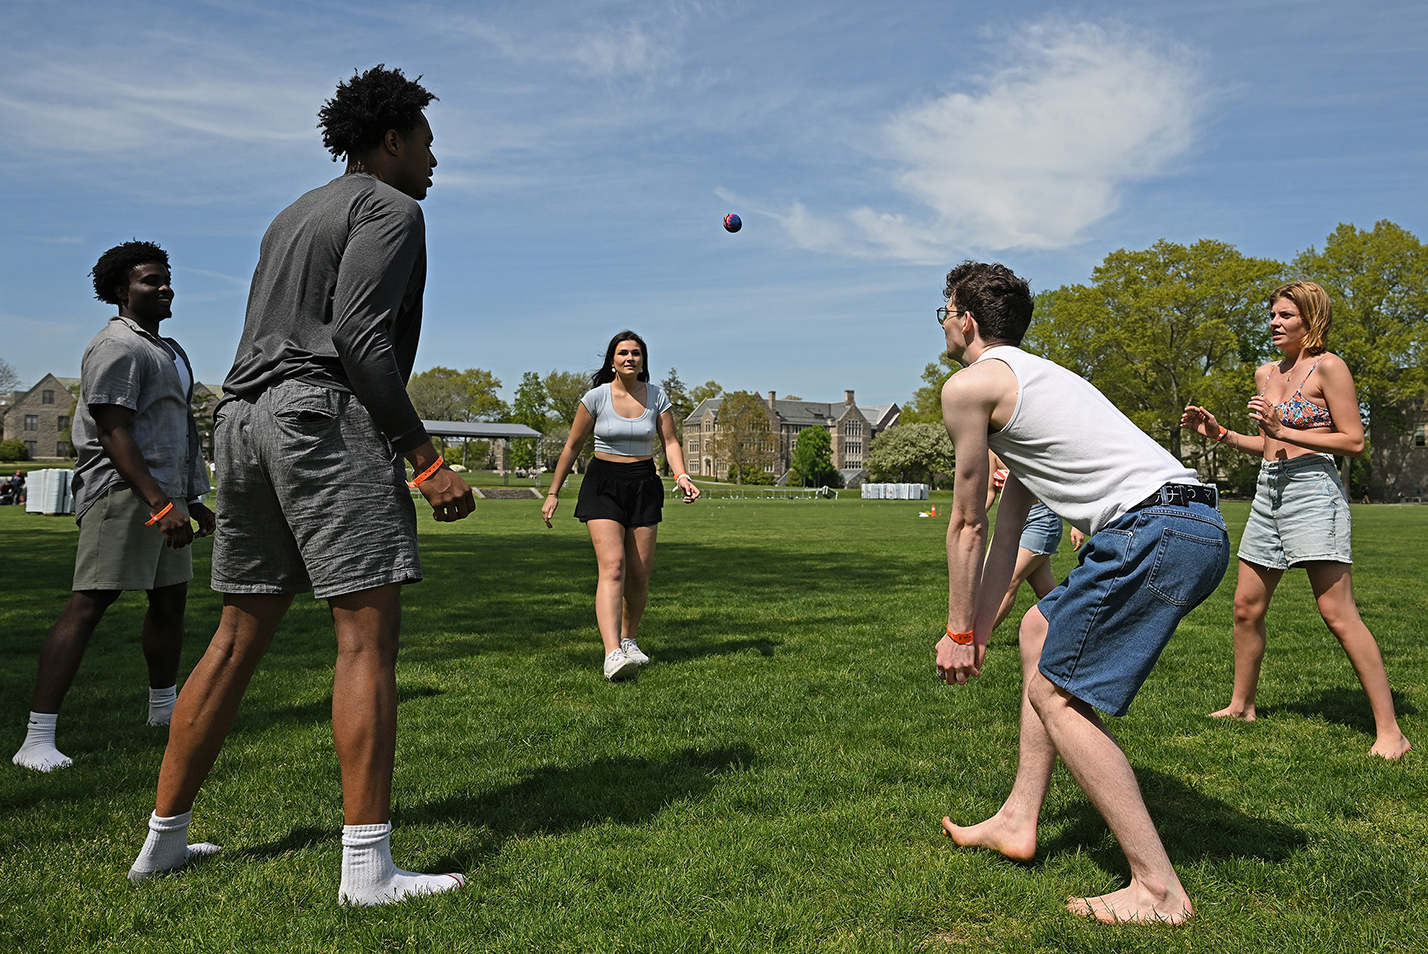 Students play hacky sack on a field.